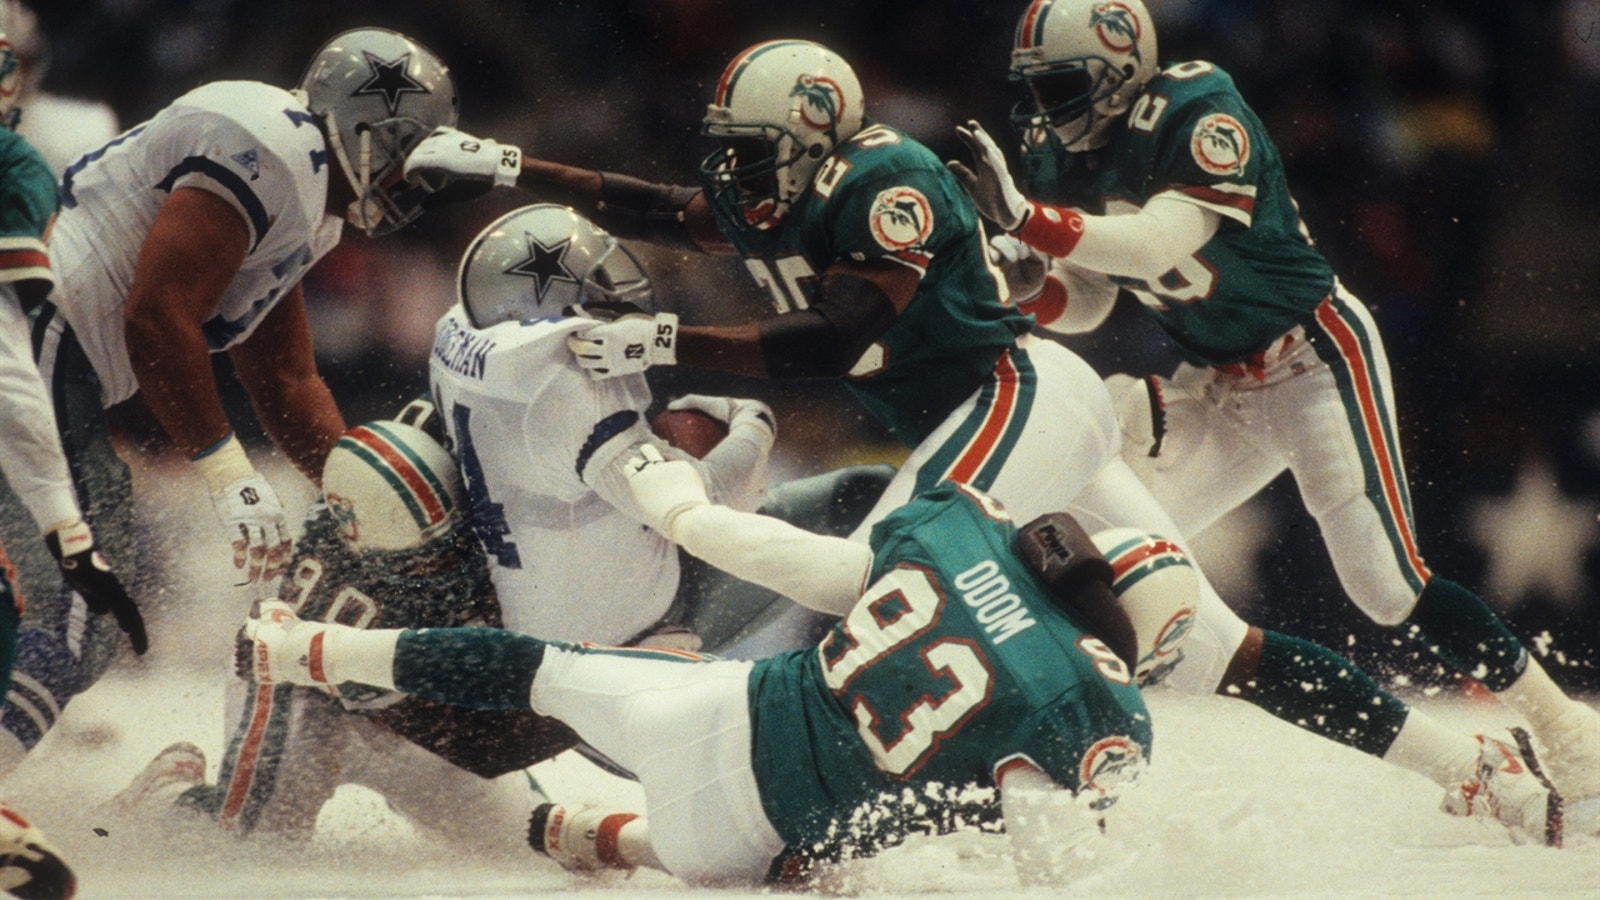 Snow in Dallas? Troy Aikman and Jimmy Johnson relive their most memorable Thanksgiving game